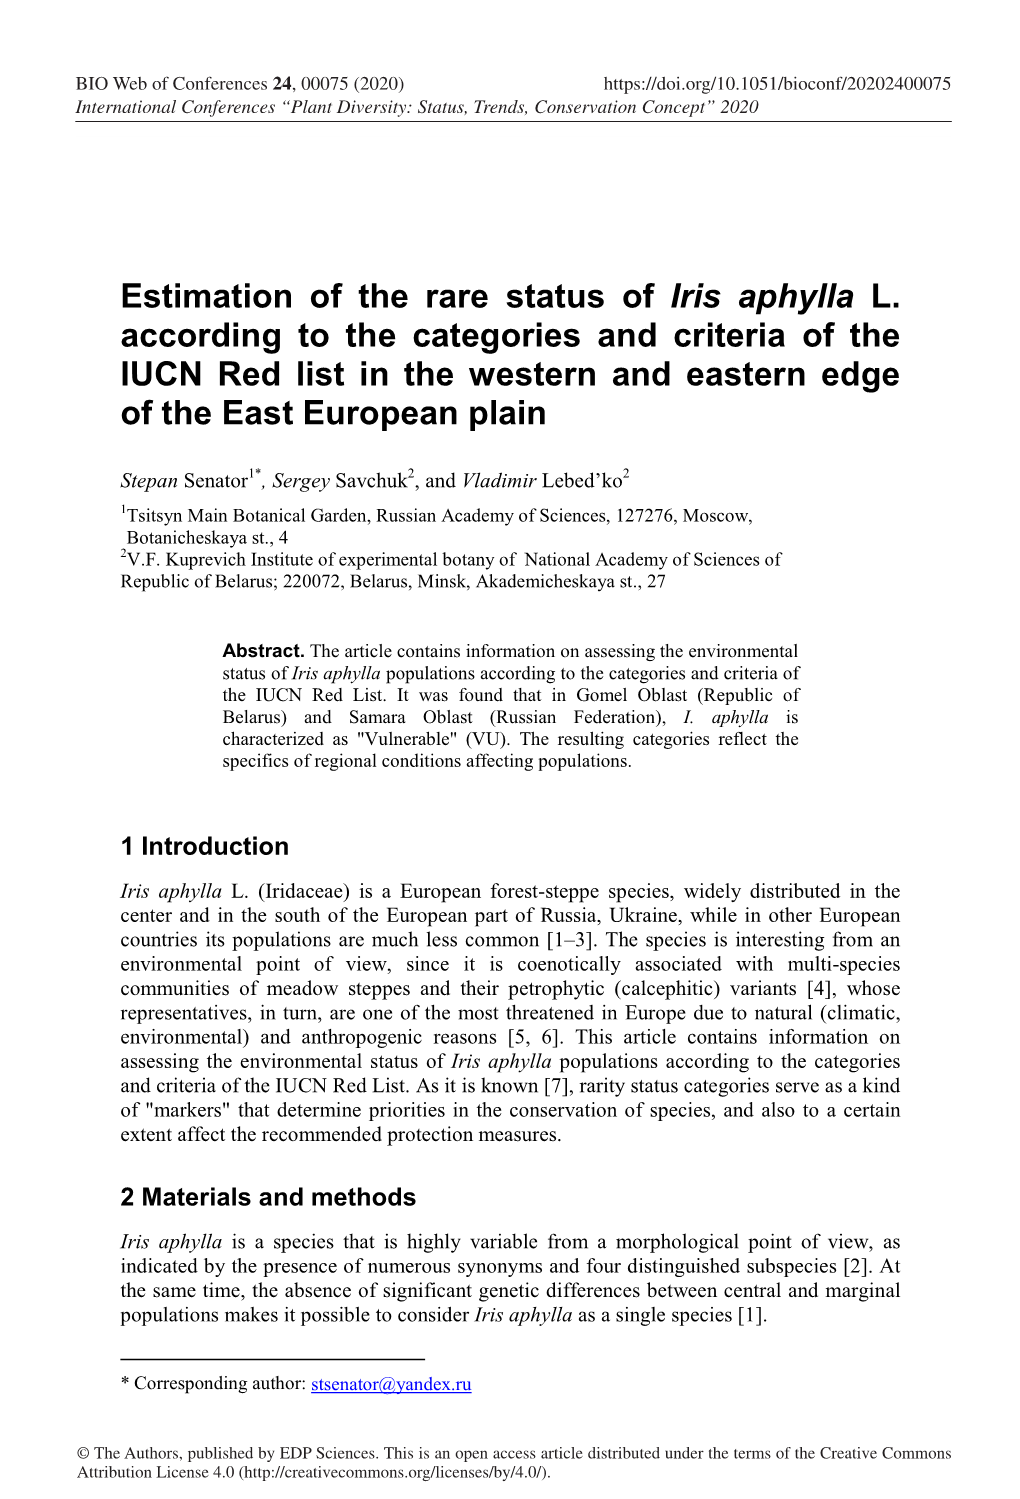 Estimation of the Rare Status of Iris Aphylla L. According to the Categories and Criteria of the IUCN Red List in the Western An